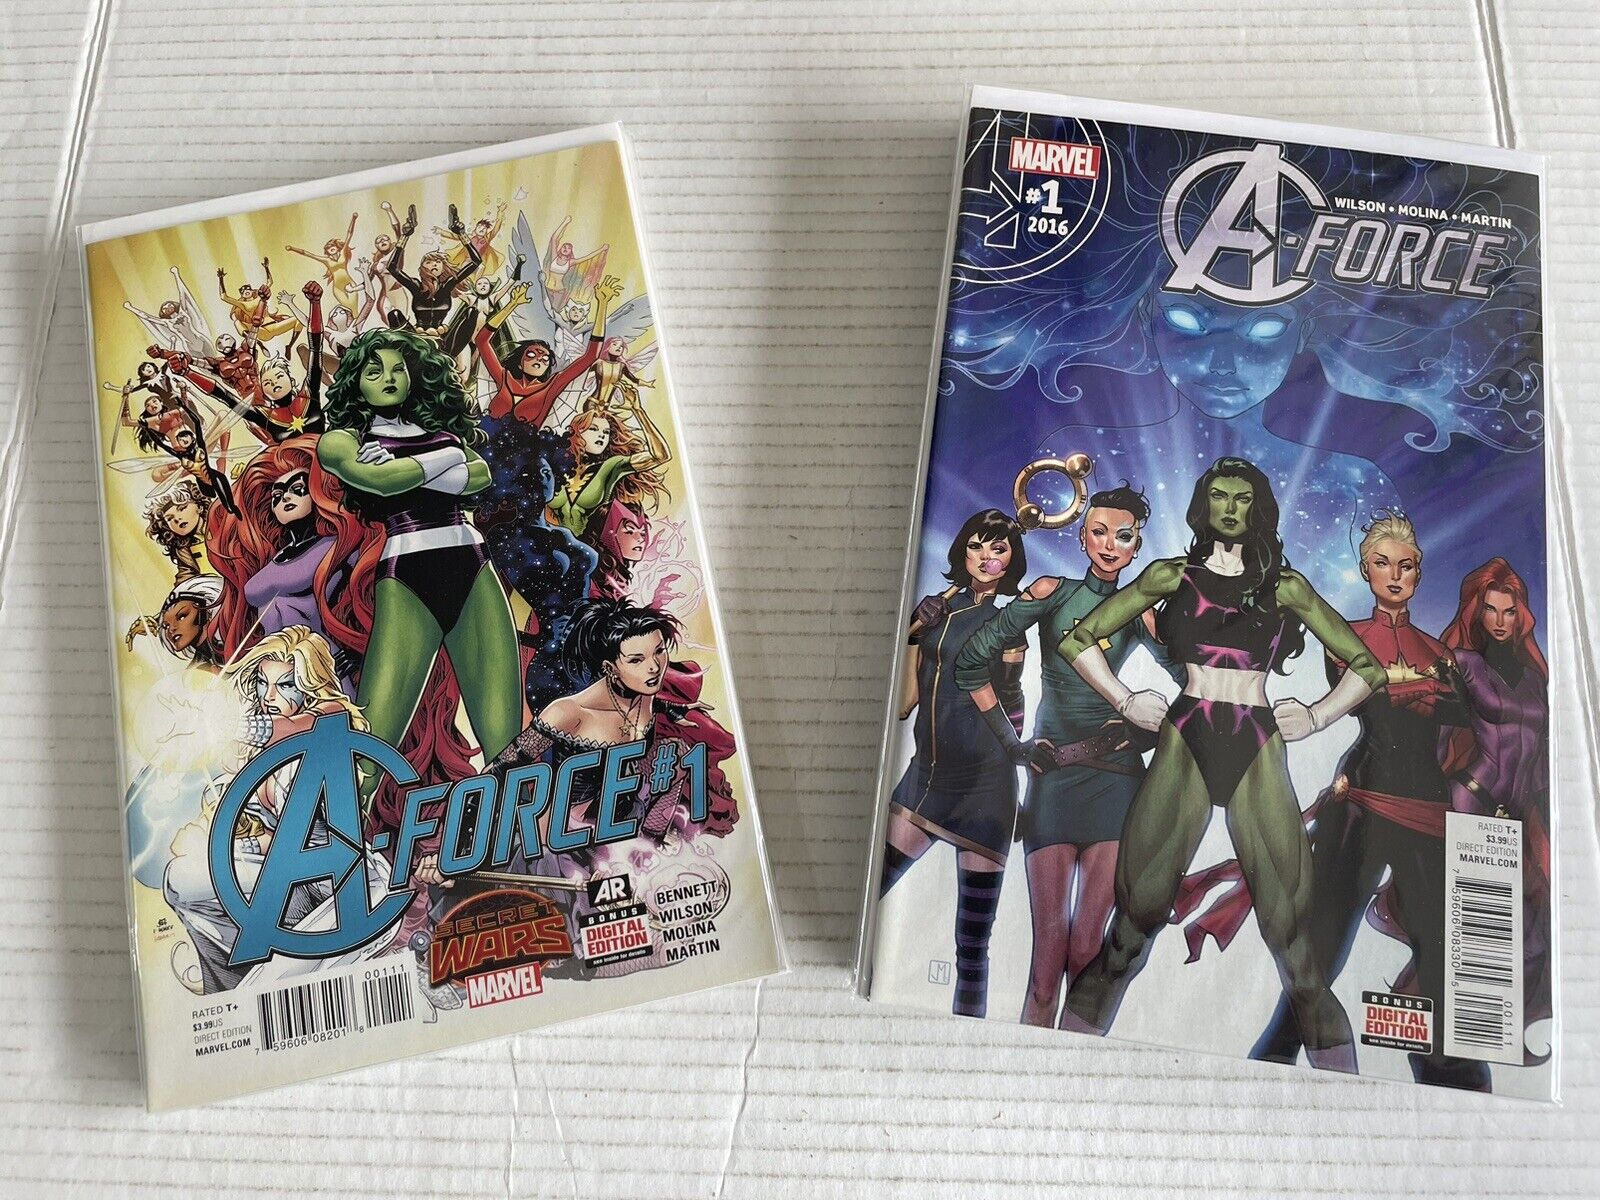 A-Force #1-5 (2015) & #1-10 (2016) 1st Singularity Marvel Complete Run Series